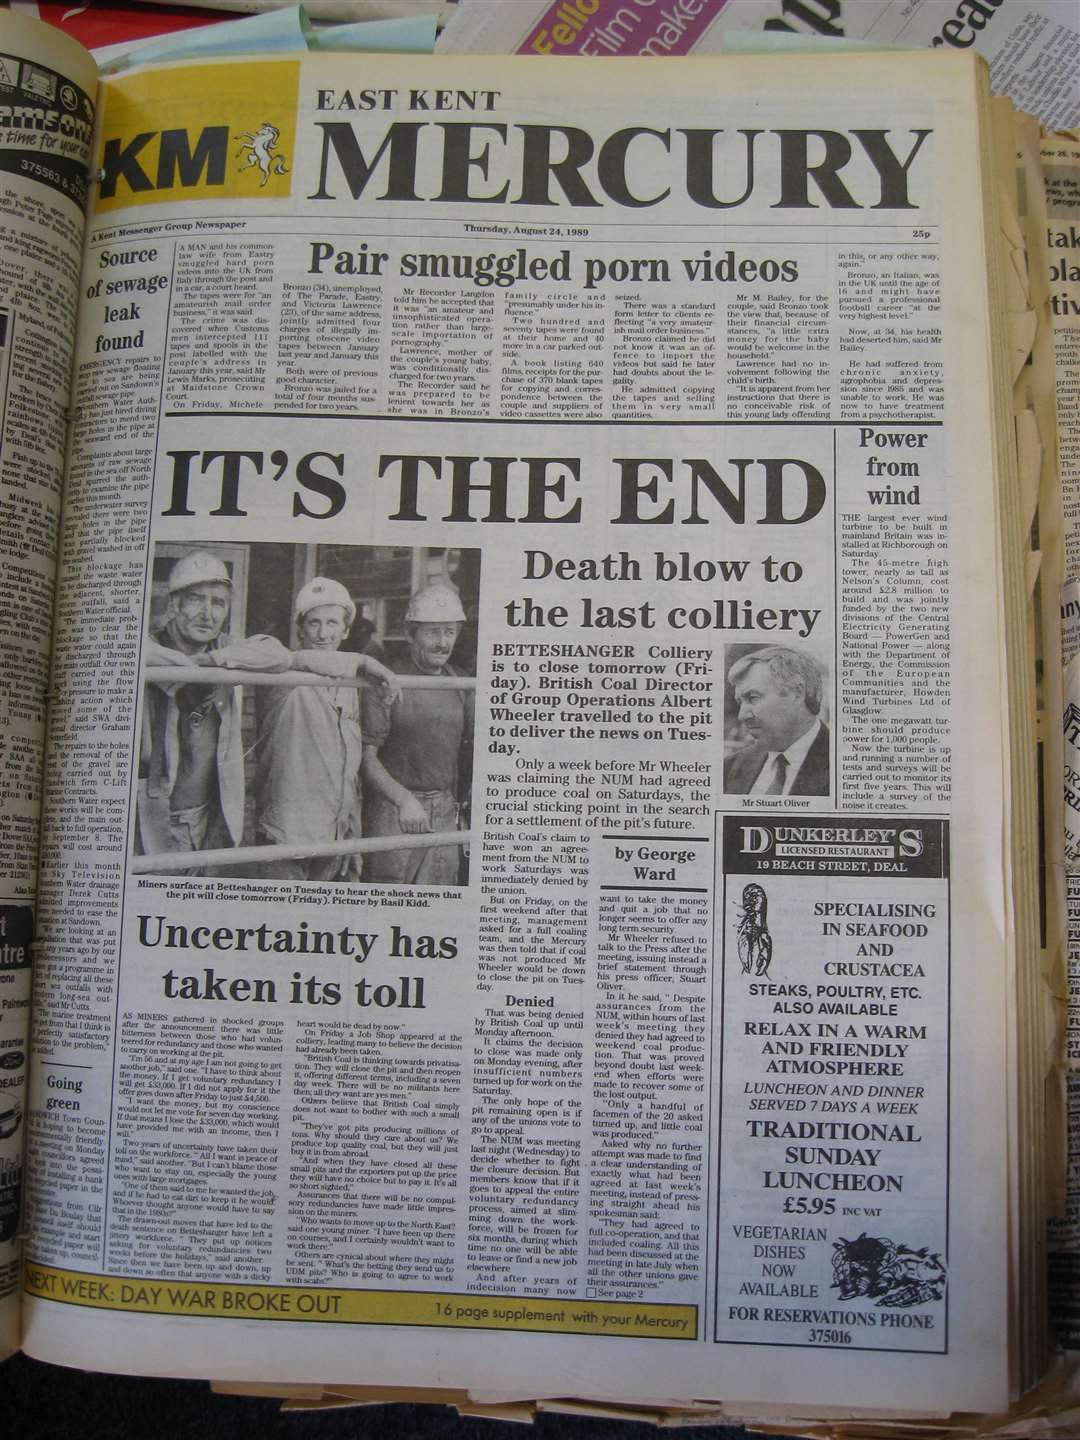 The East Kent Mercury, dated August 24, 1989, reporting on the closure of Betteshanger Colliery